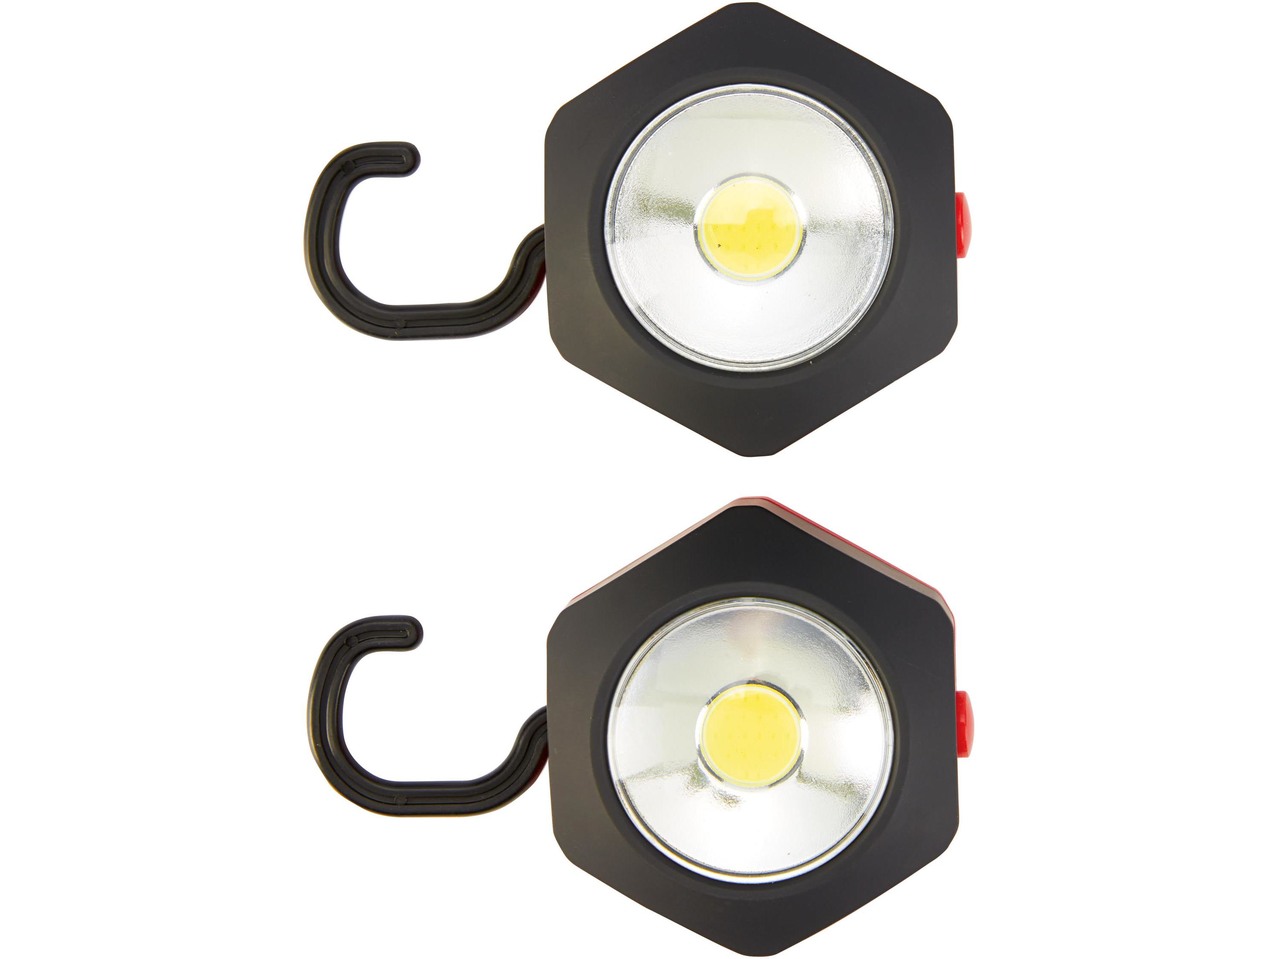 LED Work Light, 1 or 2 pieces